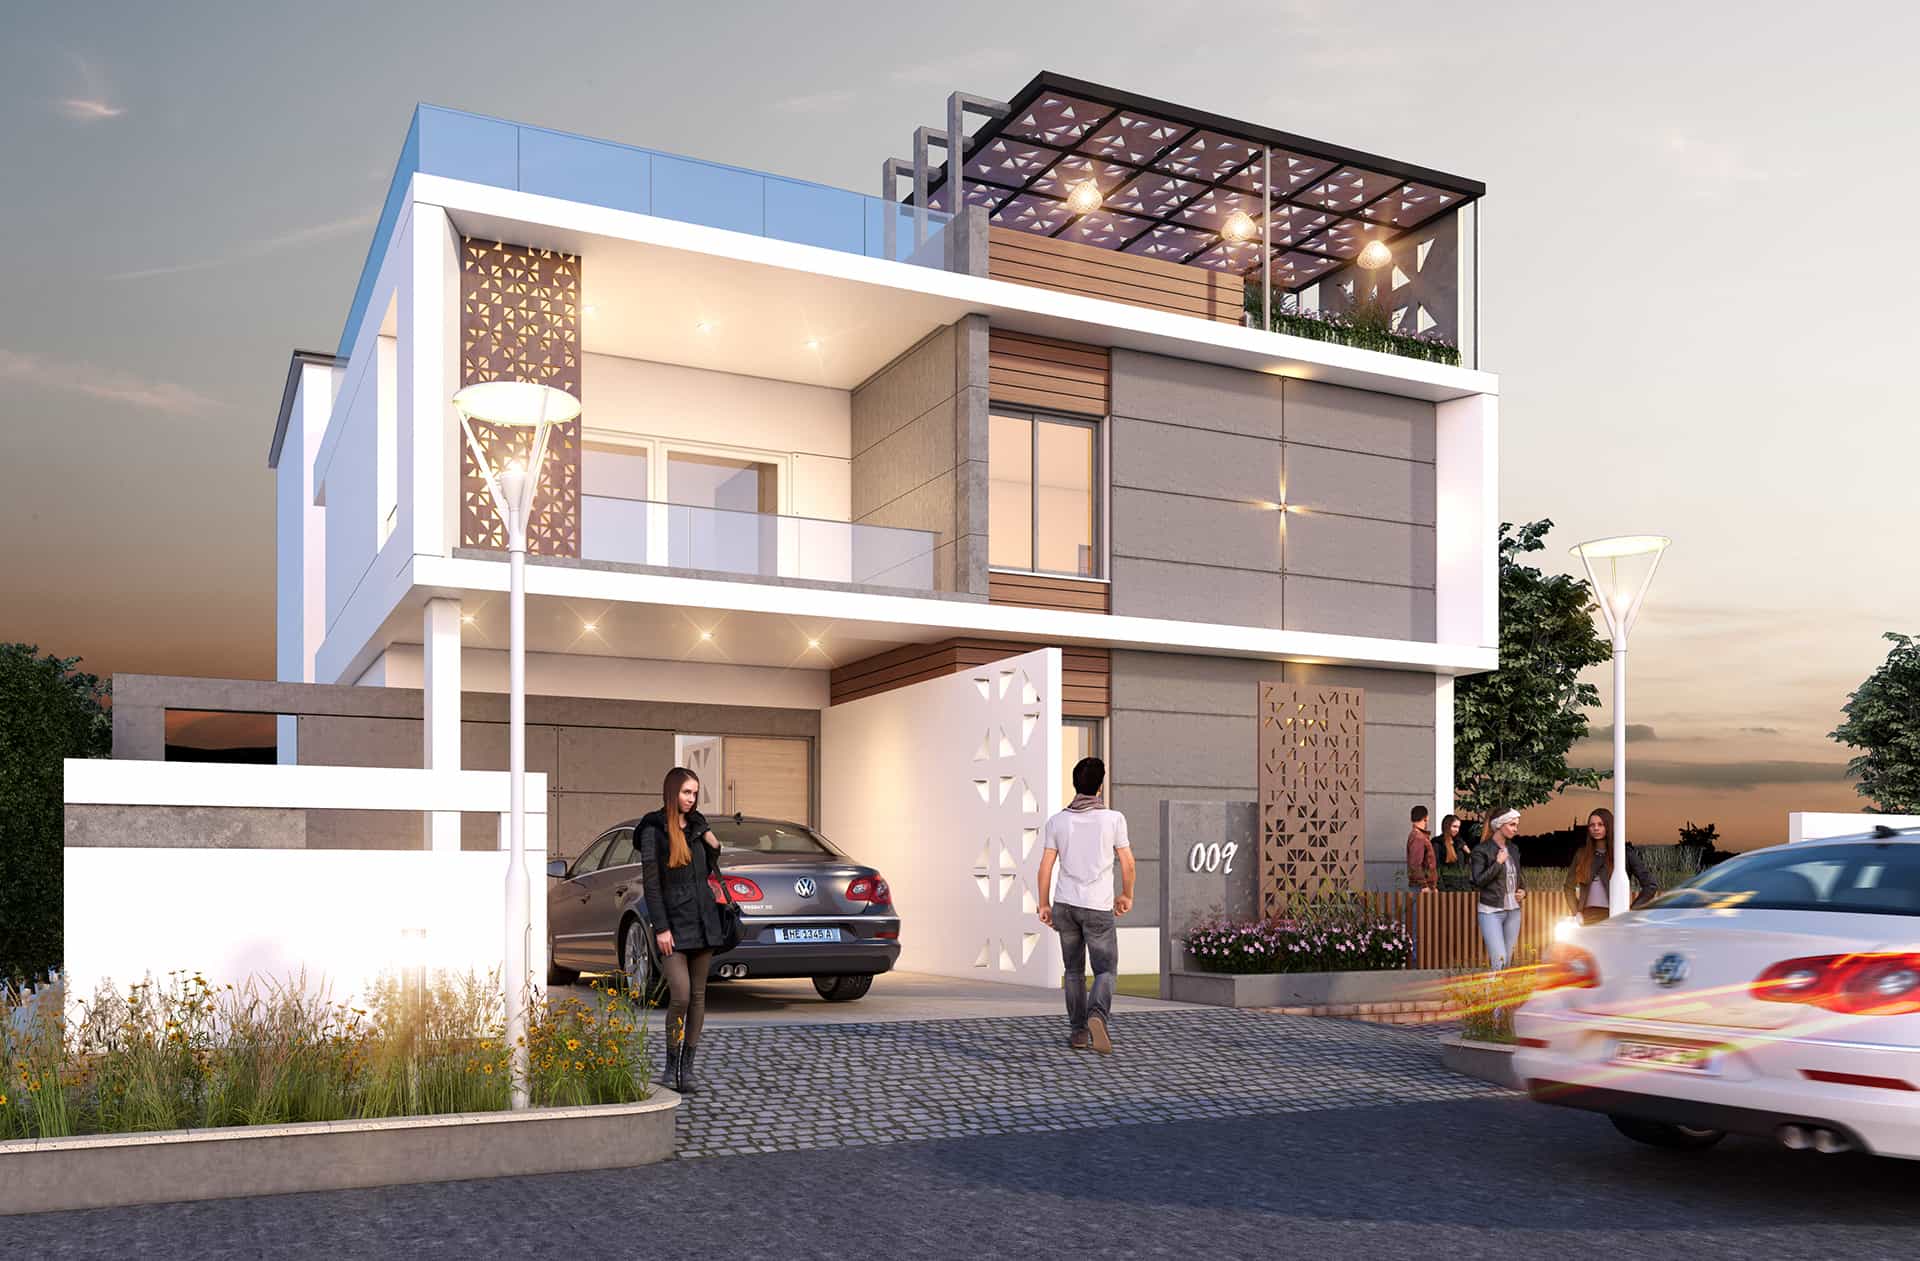 Exterior single house visualizations